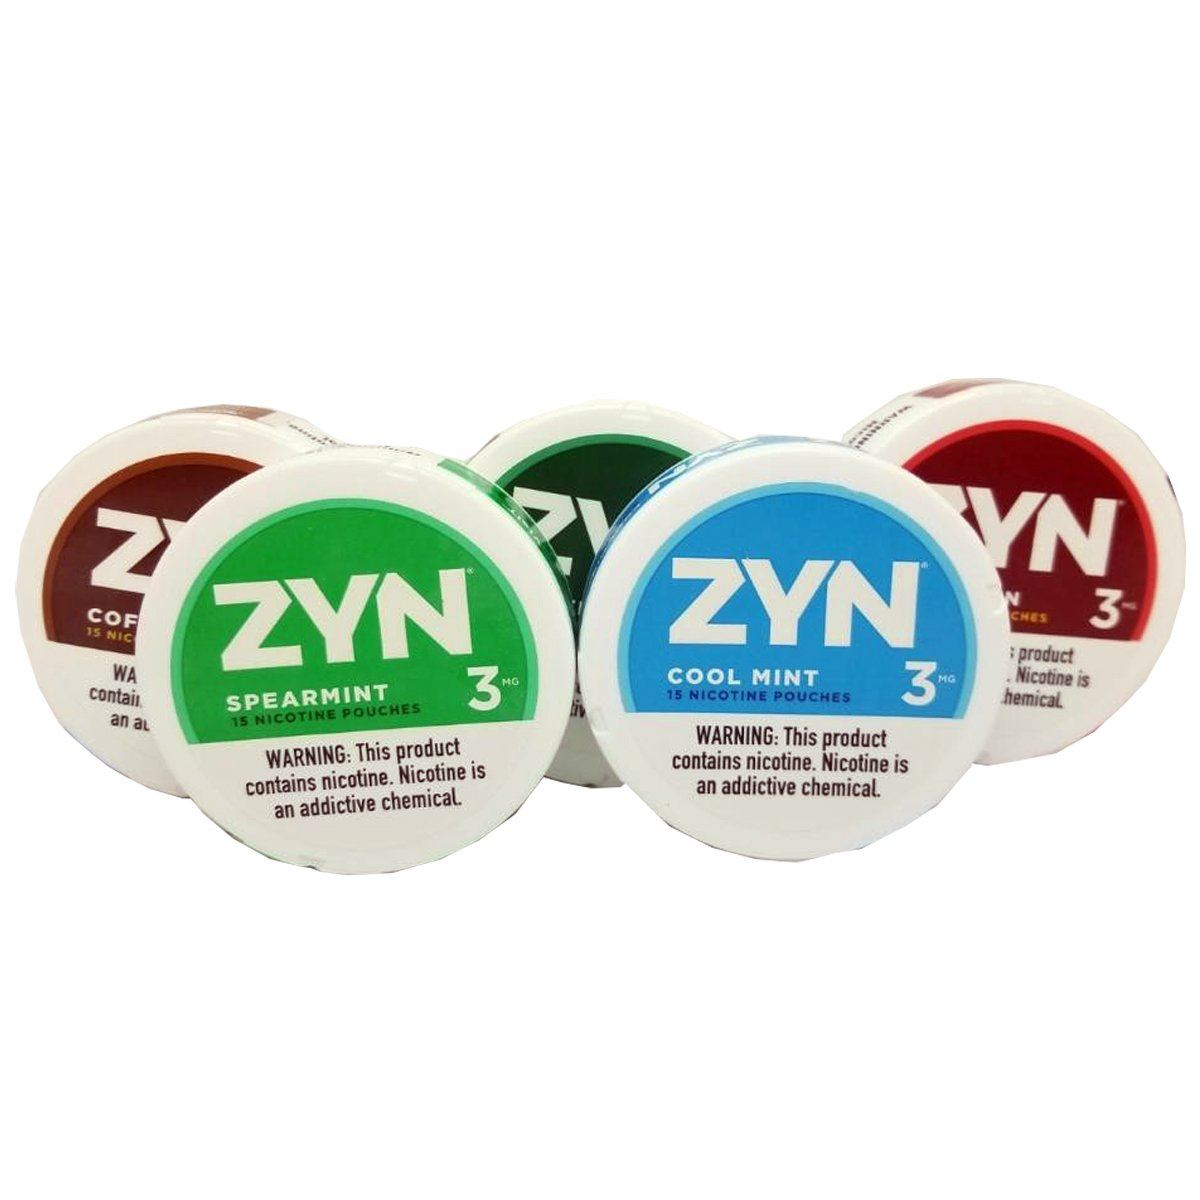 ZYN Nicotine Pouches Review - Harm Reduction - Ecigclick